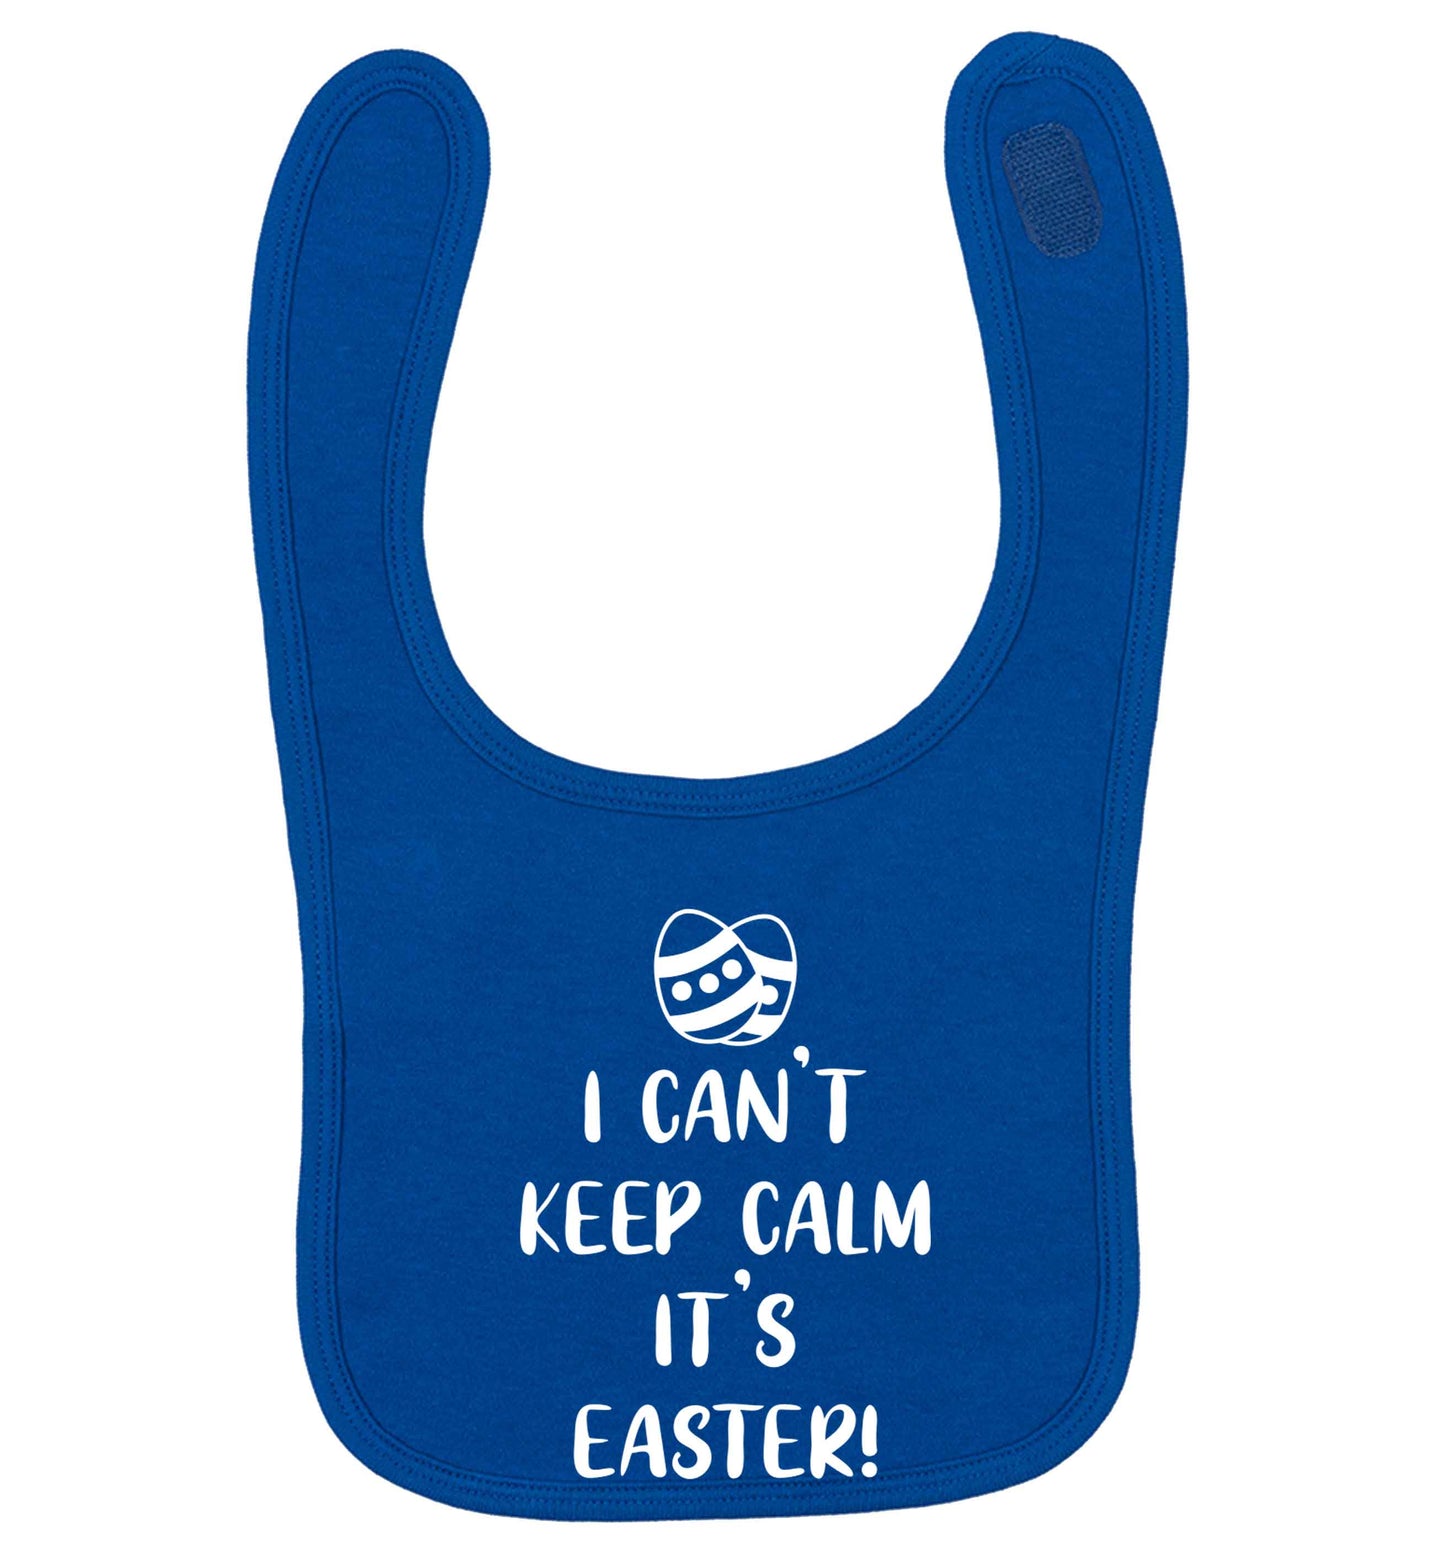 I can't keep calm it's Easter royal blue baby bib